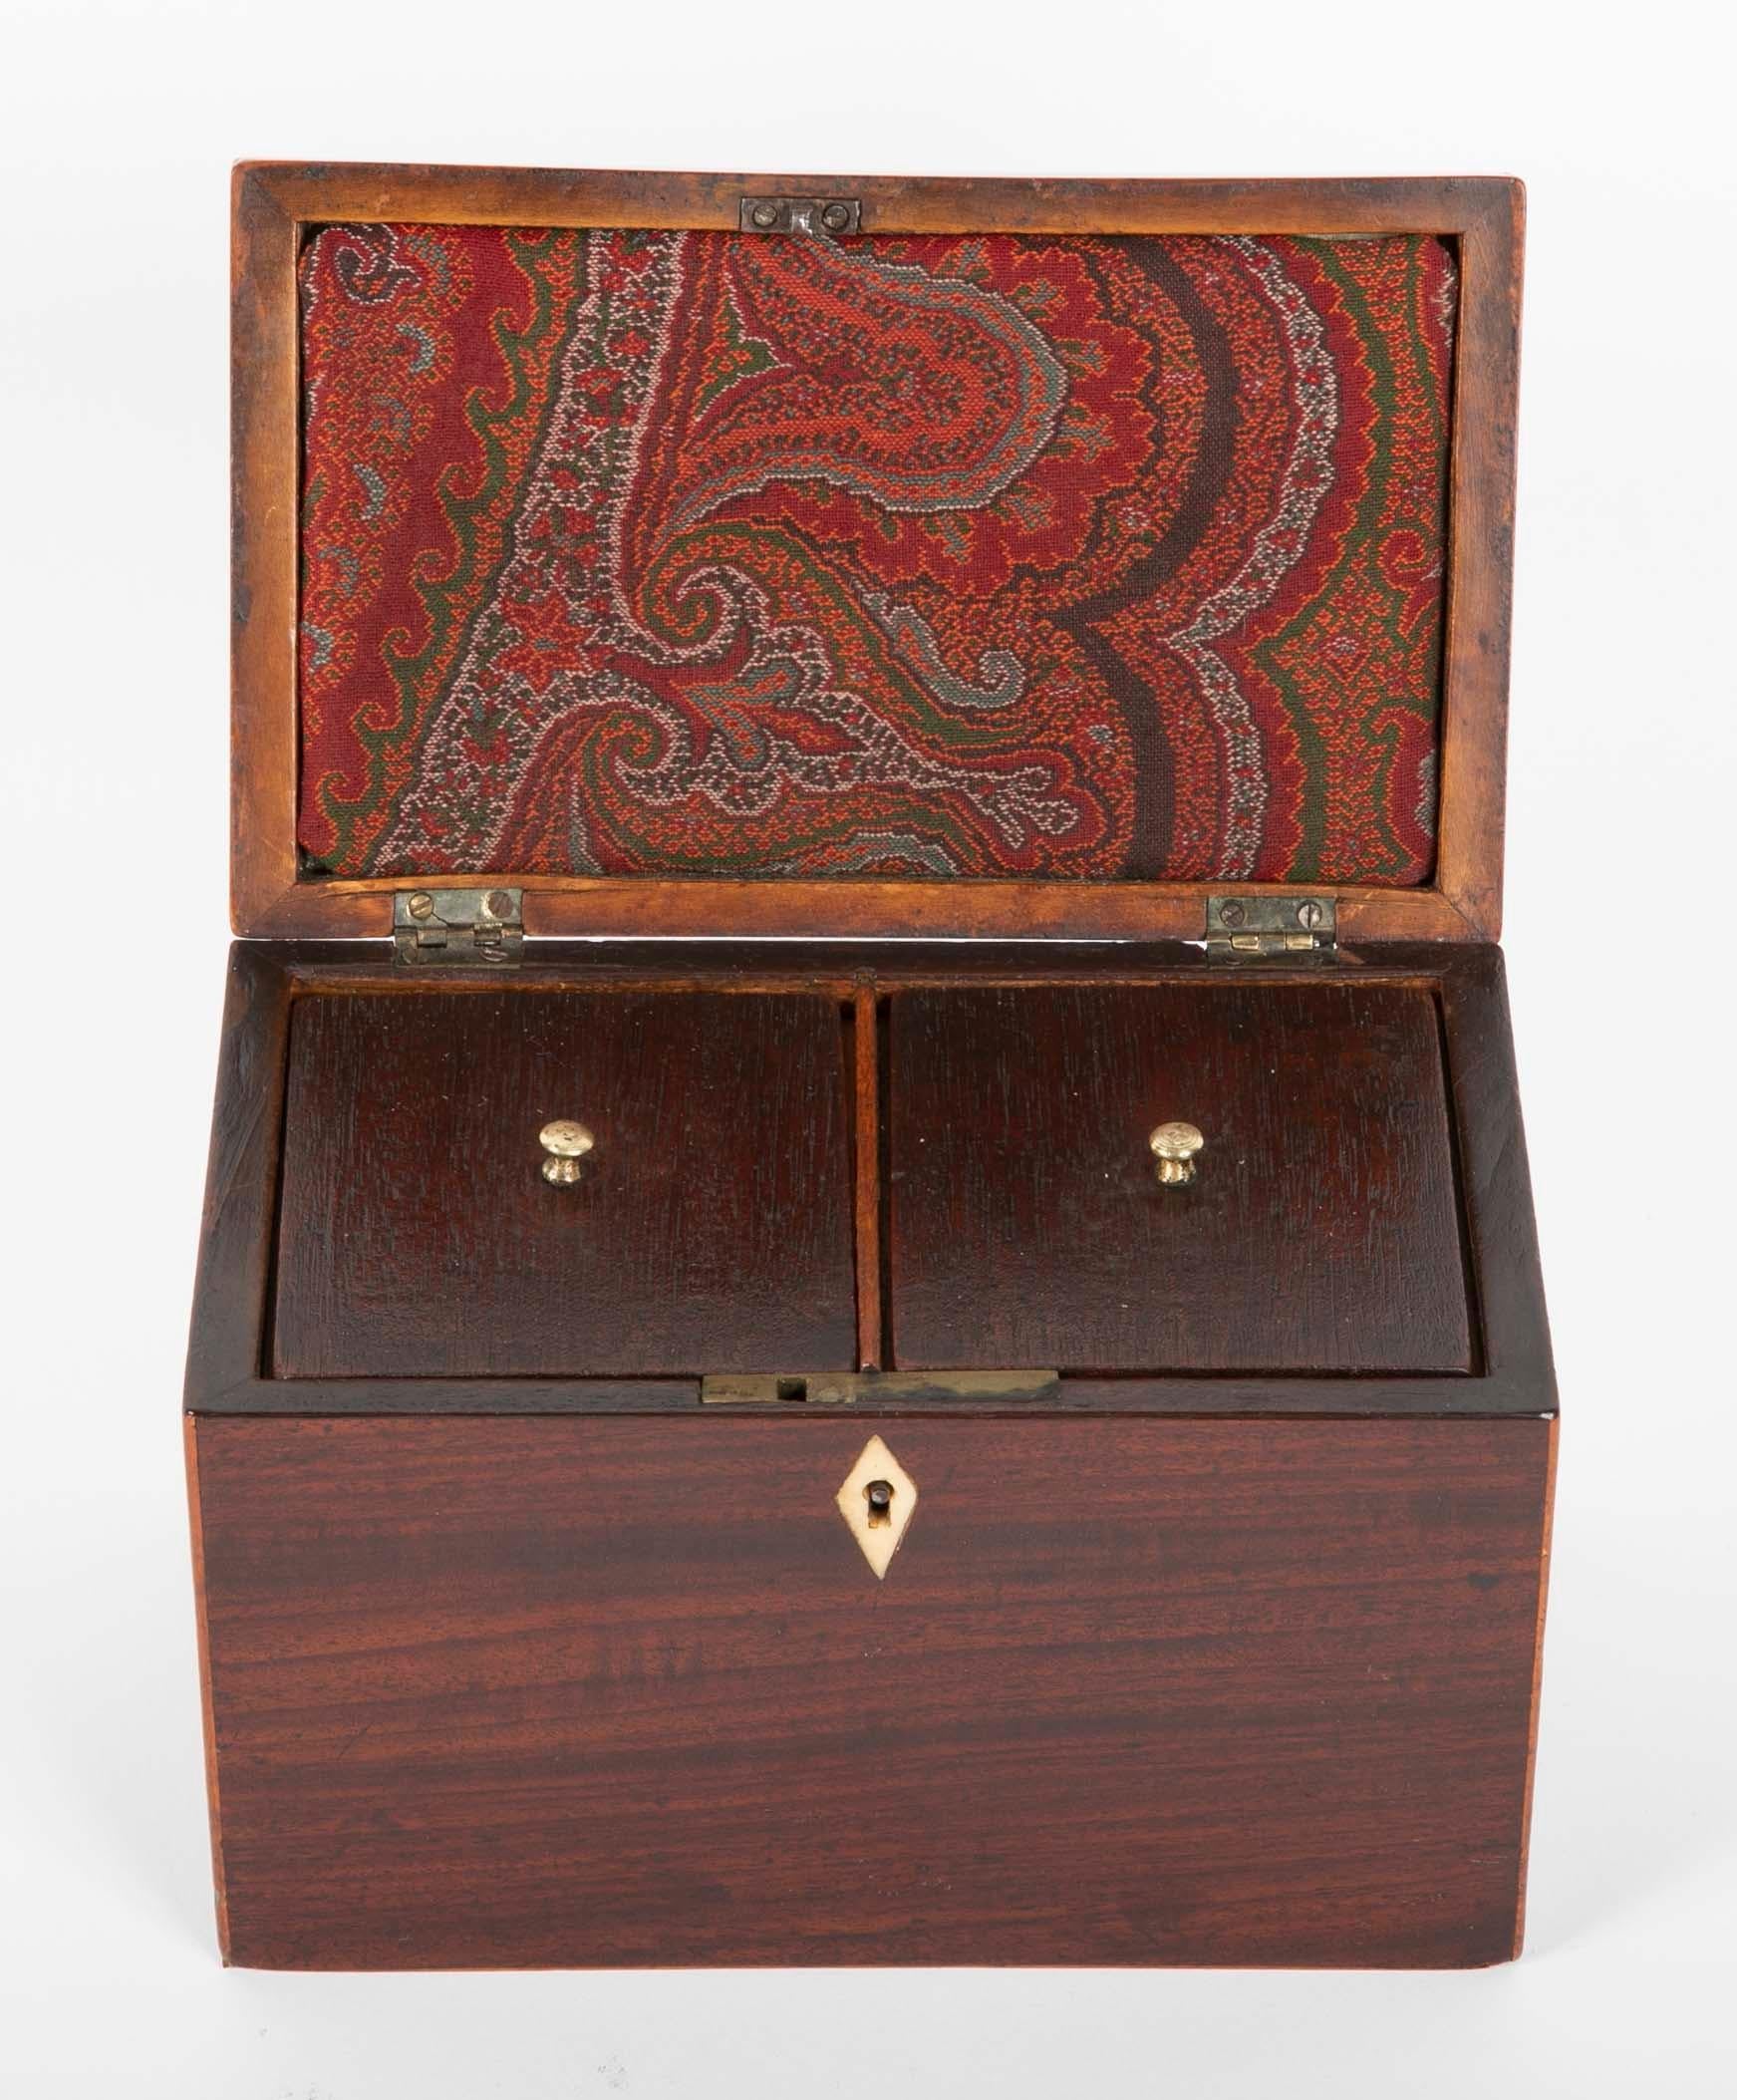 A fine English mahogany tea caddy with fruitwood inlay from the reign of George III. The interior with two lidded compartments for tea leaves, with the personal touch of a piece of a Kashmir shawl tucked into the top as a liner. Inlaid diamond